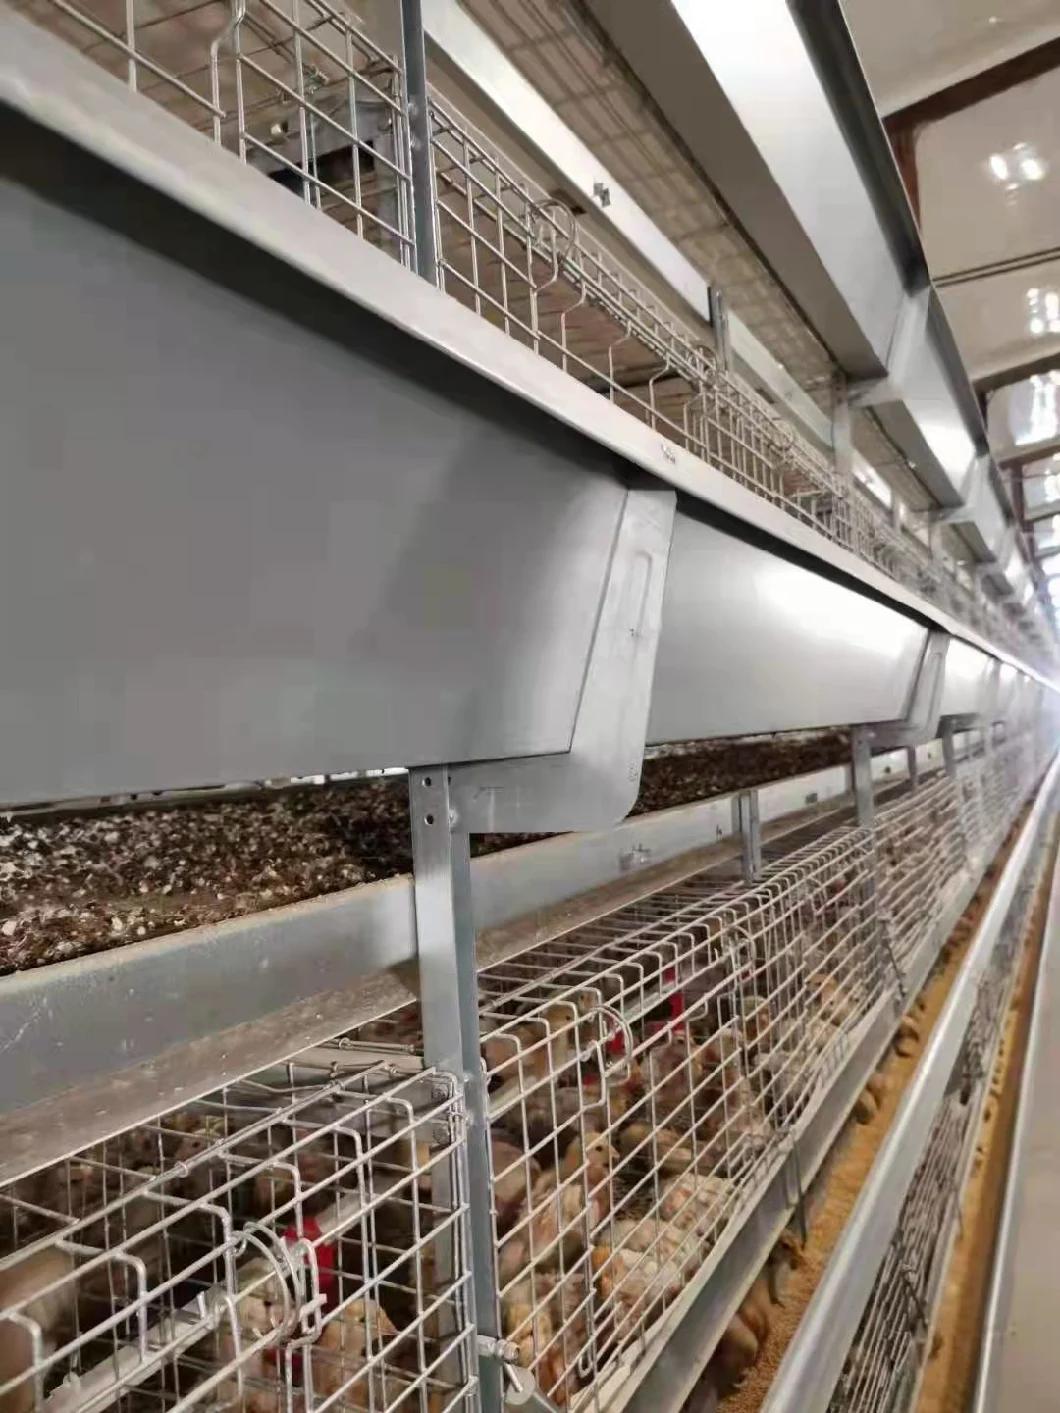 Automatic Poultry Farming System Chicken Broiler Farm Equipment Layer Broiler Chicken Cage